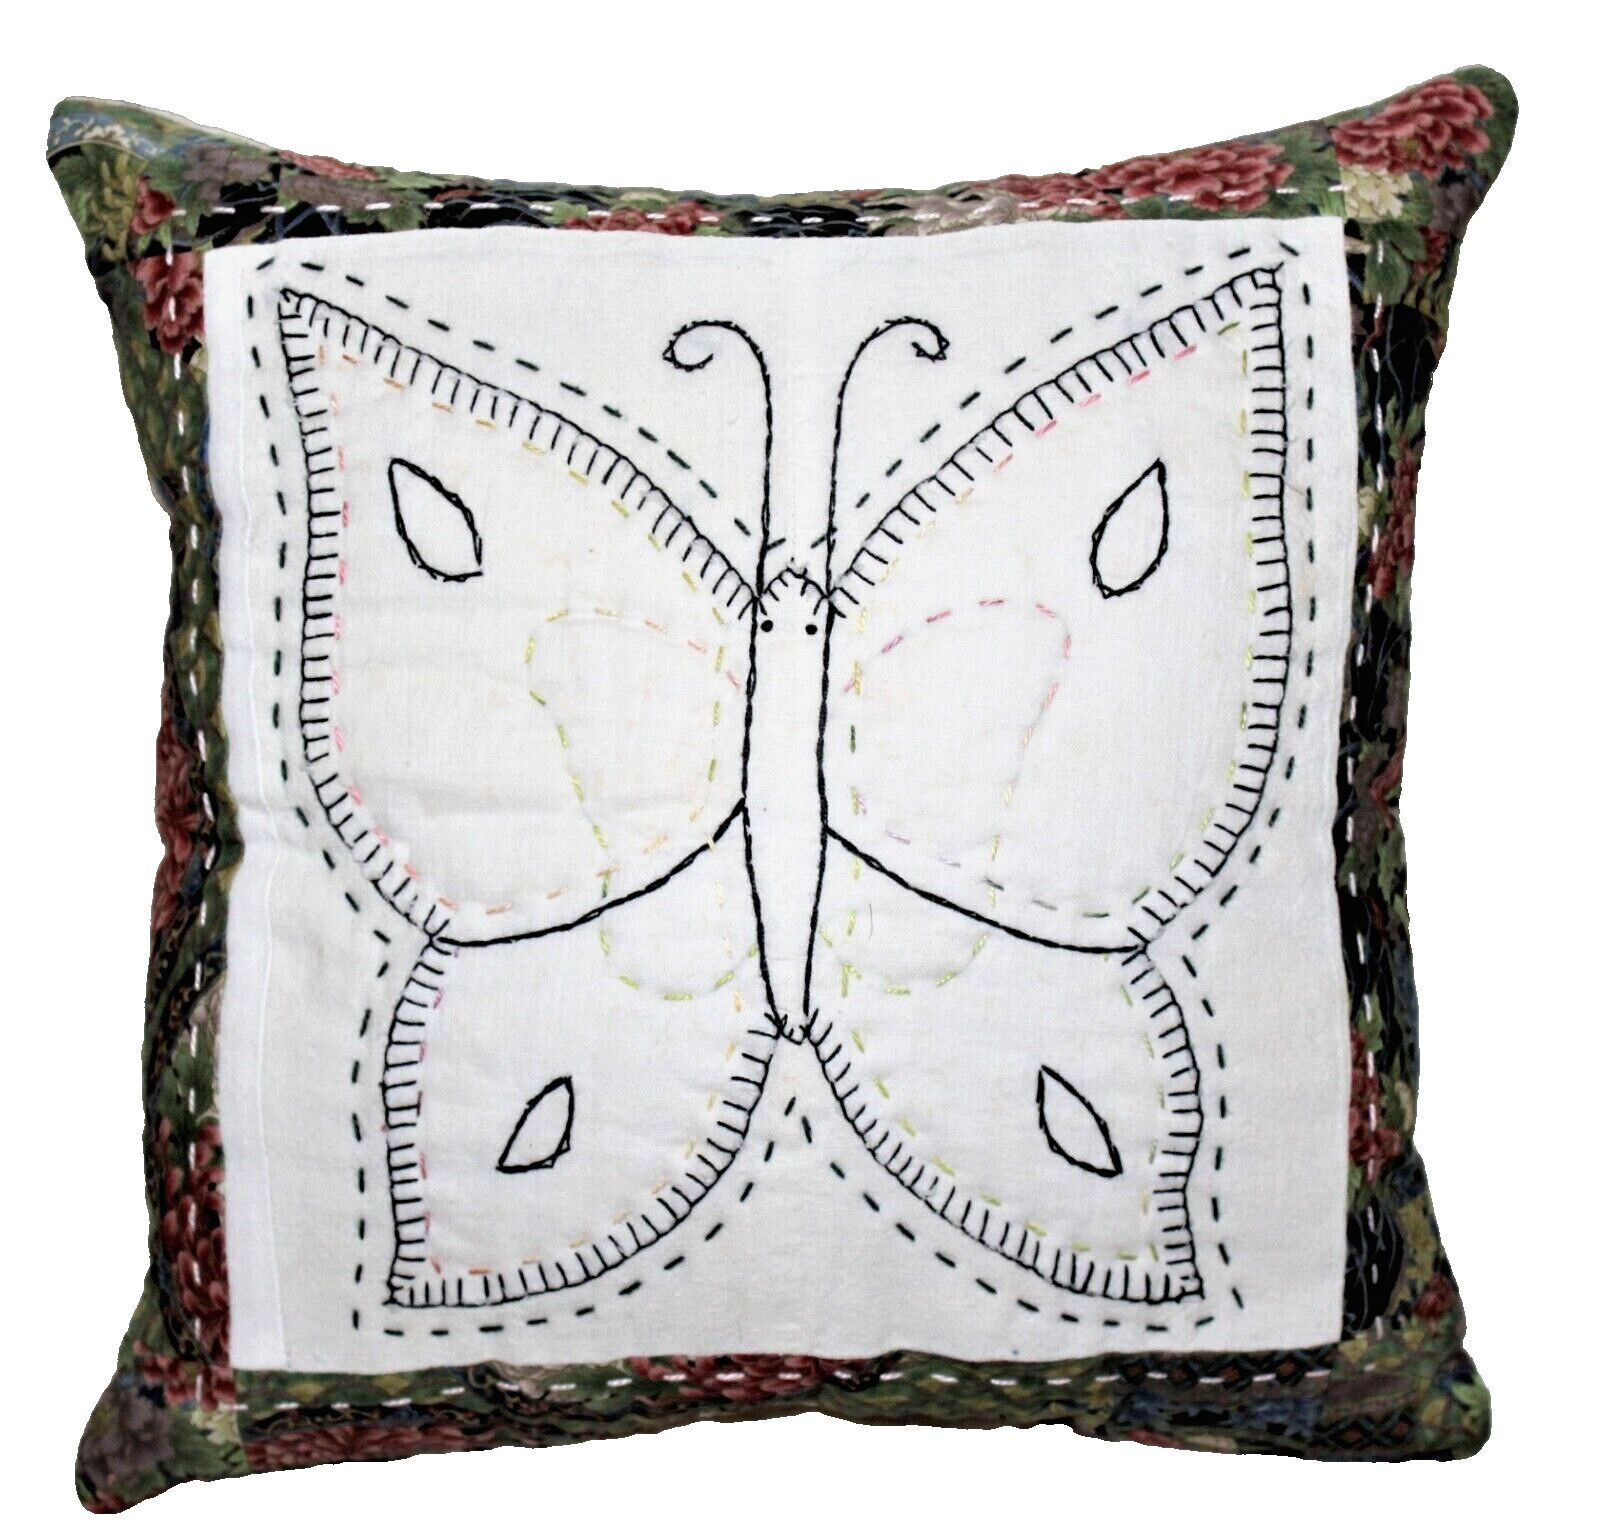 Throw Pillow Made With Vintage Butterfly Hand Stitched Applique Embroidery Quilt